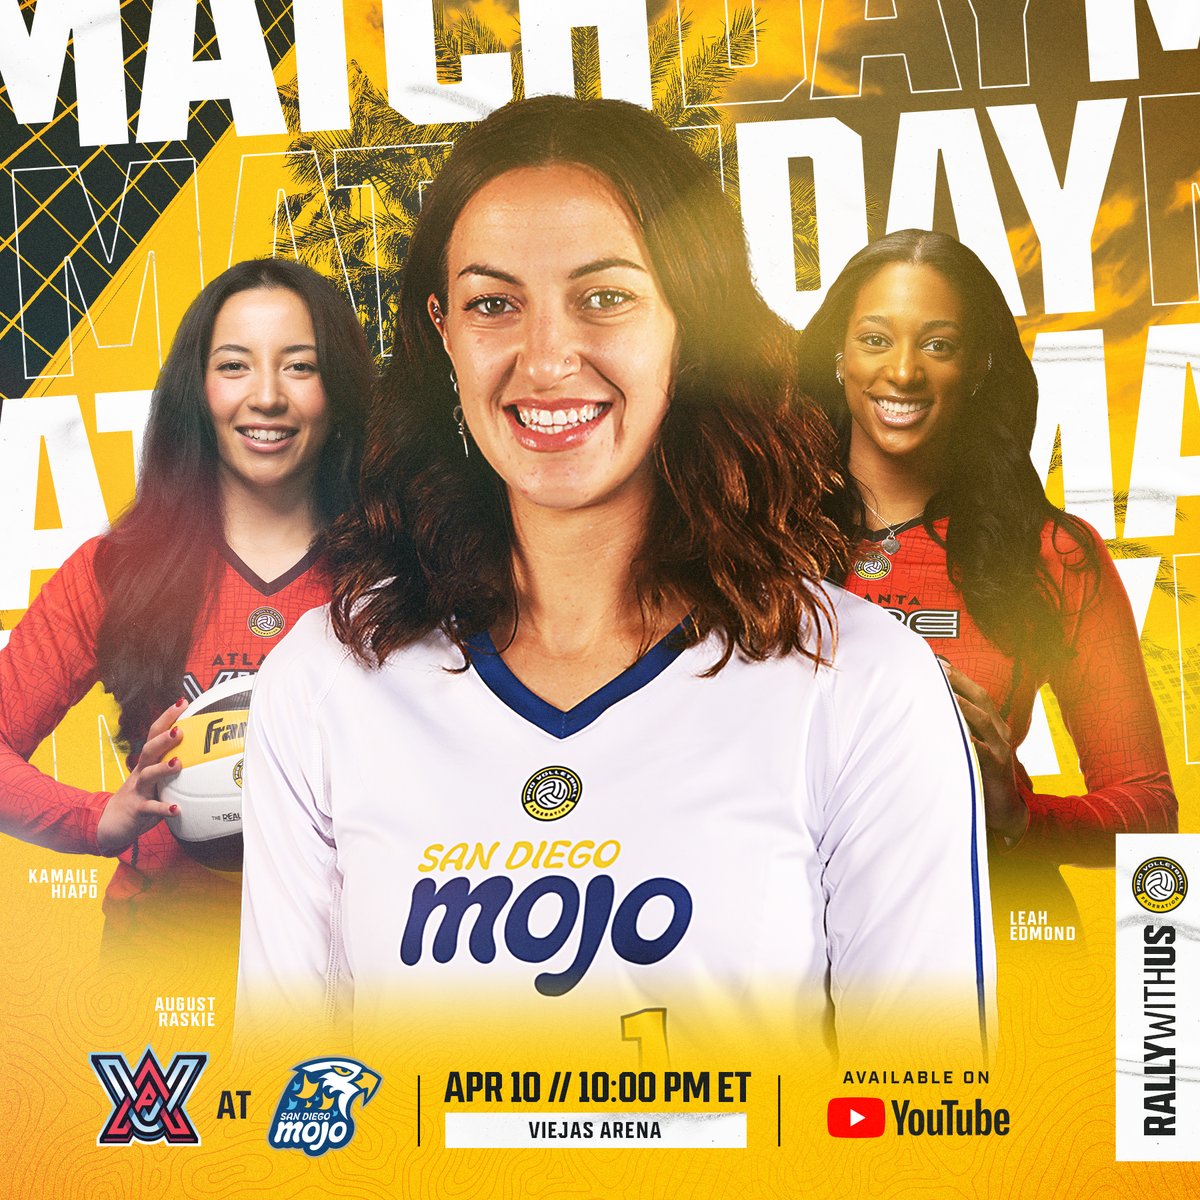 Don’t miss an exciting match tonight on @YouTube at 10pm ET as the @sandiegomojo host the @AtlantaVibeVB 

#RallyWithUs #RealProVolleyball